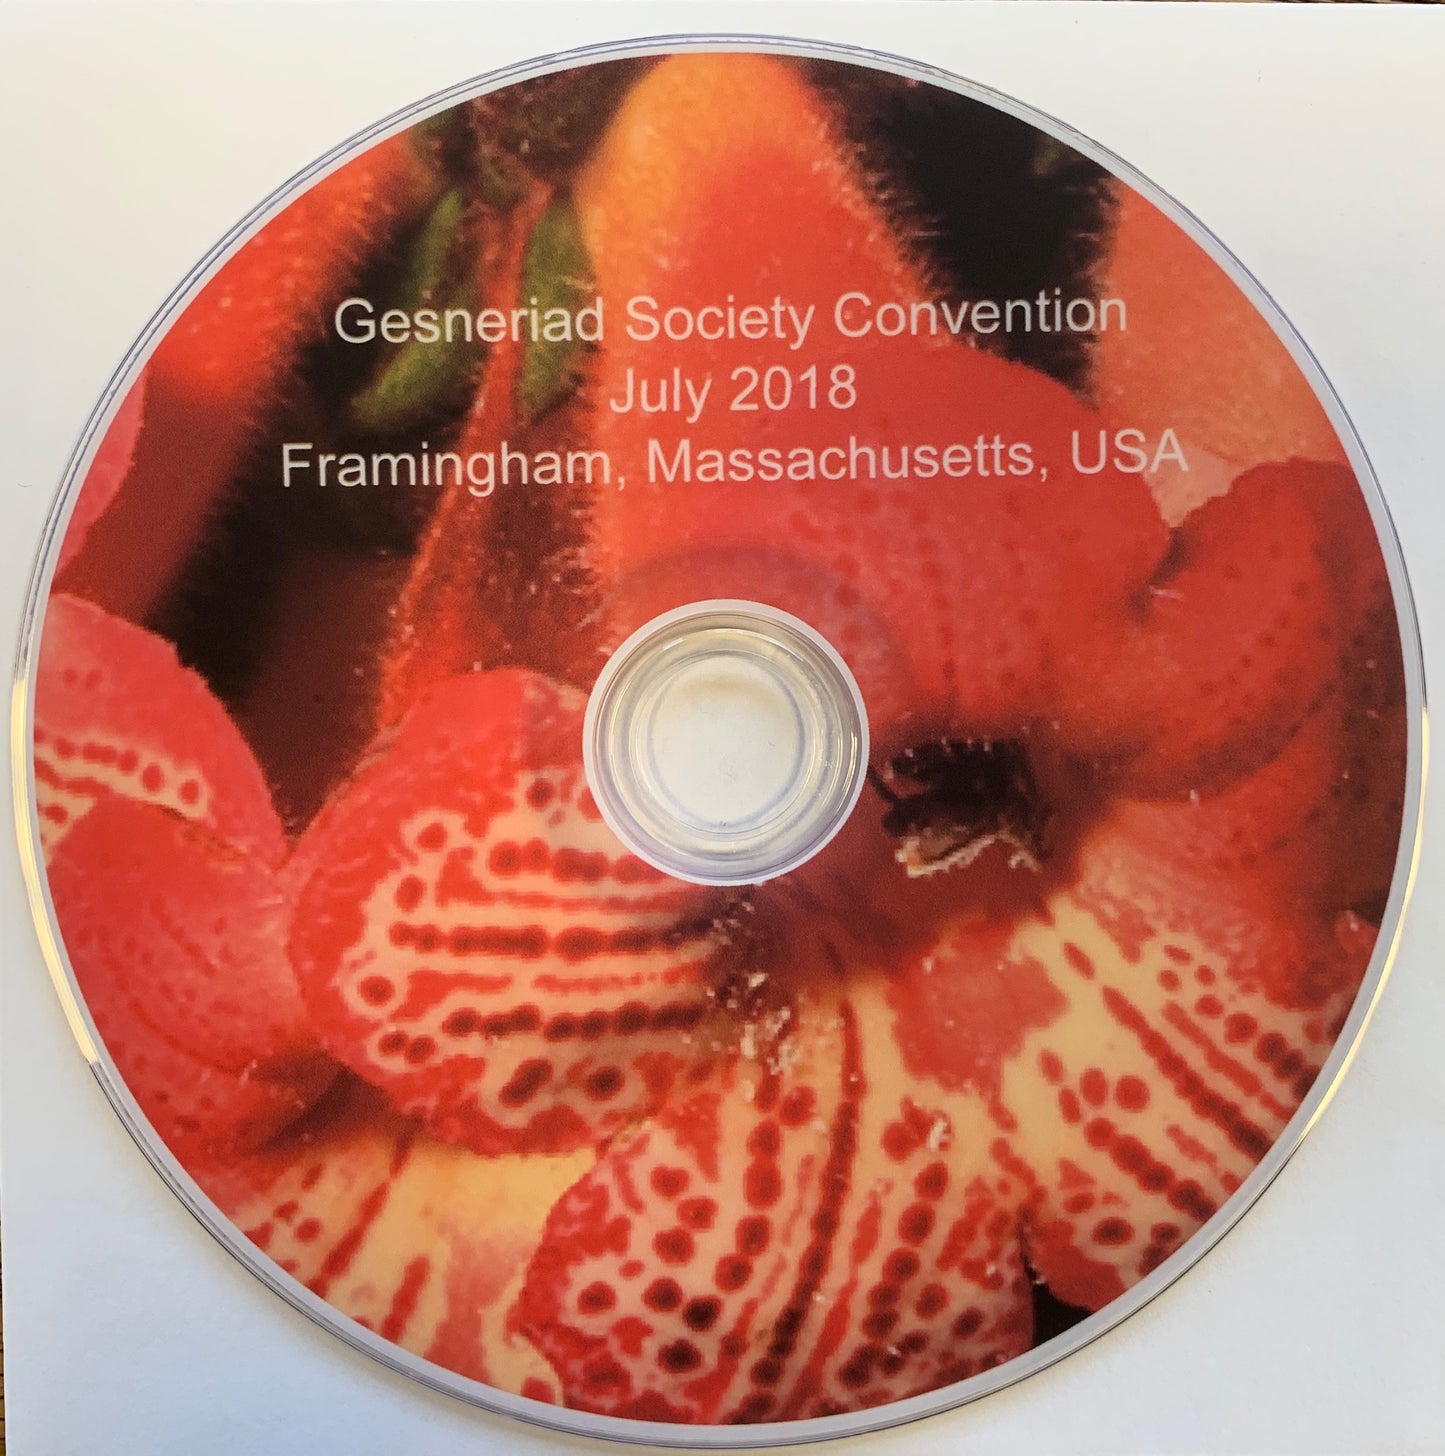 Convention 2018 DVD